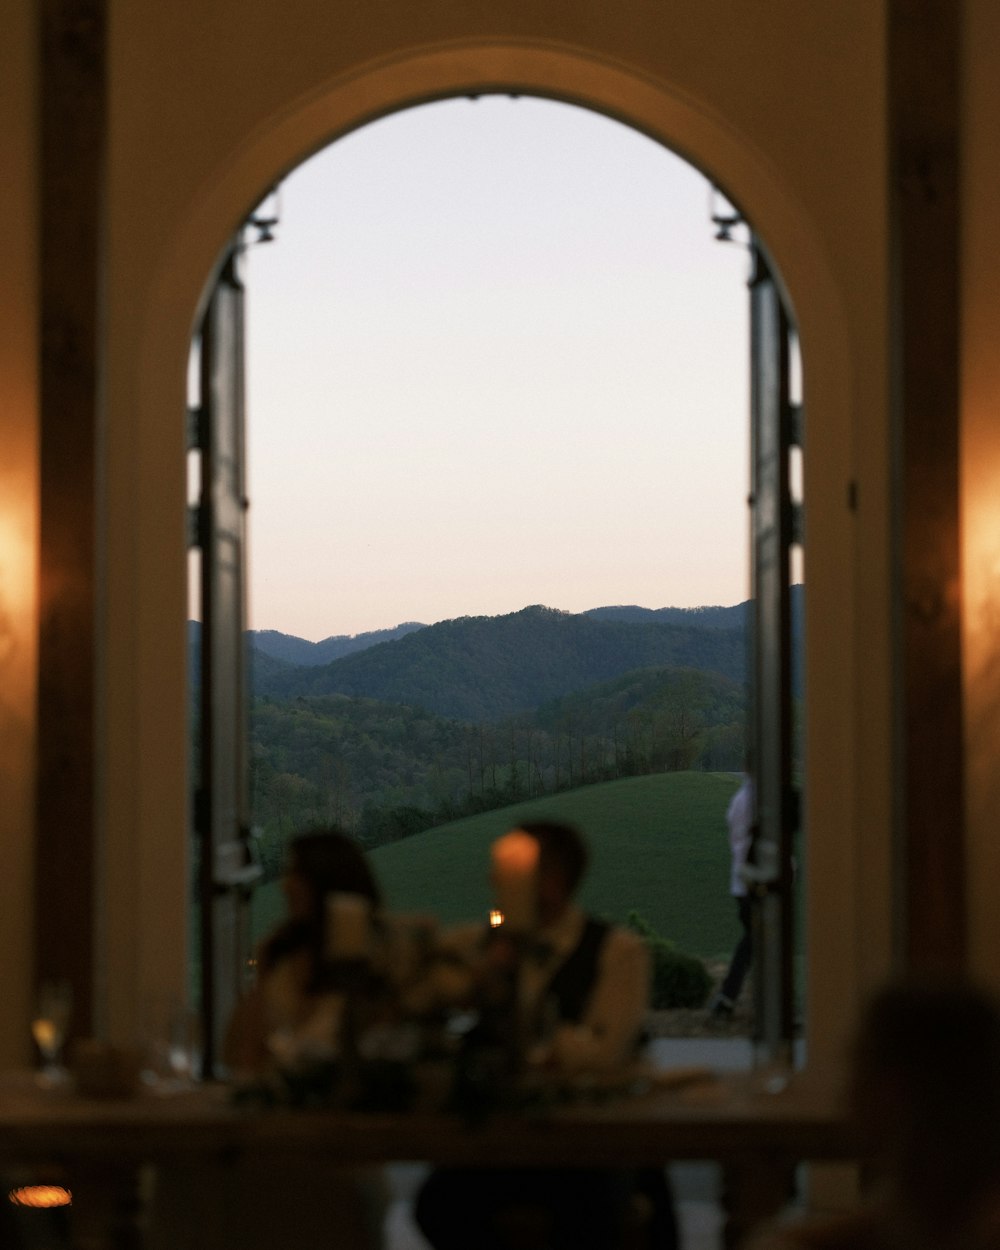 a group of people sitting at a table looking out a window